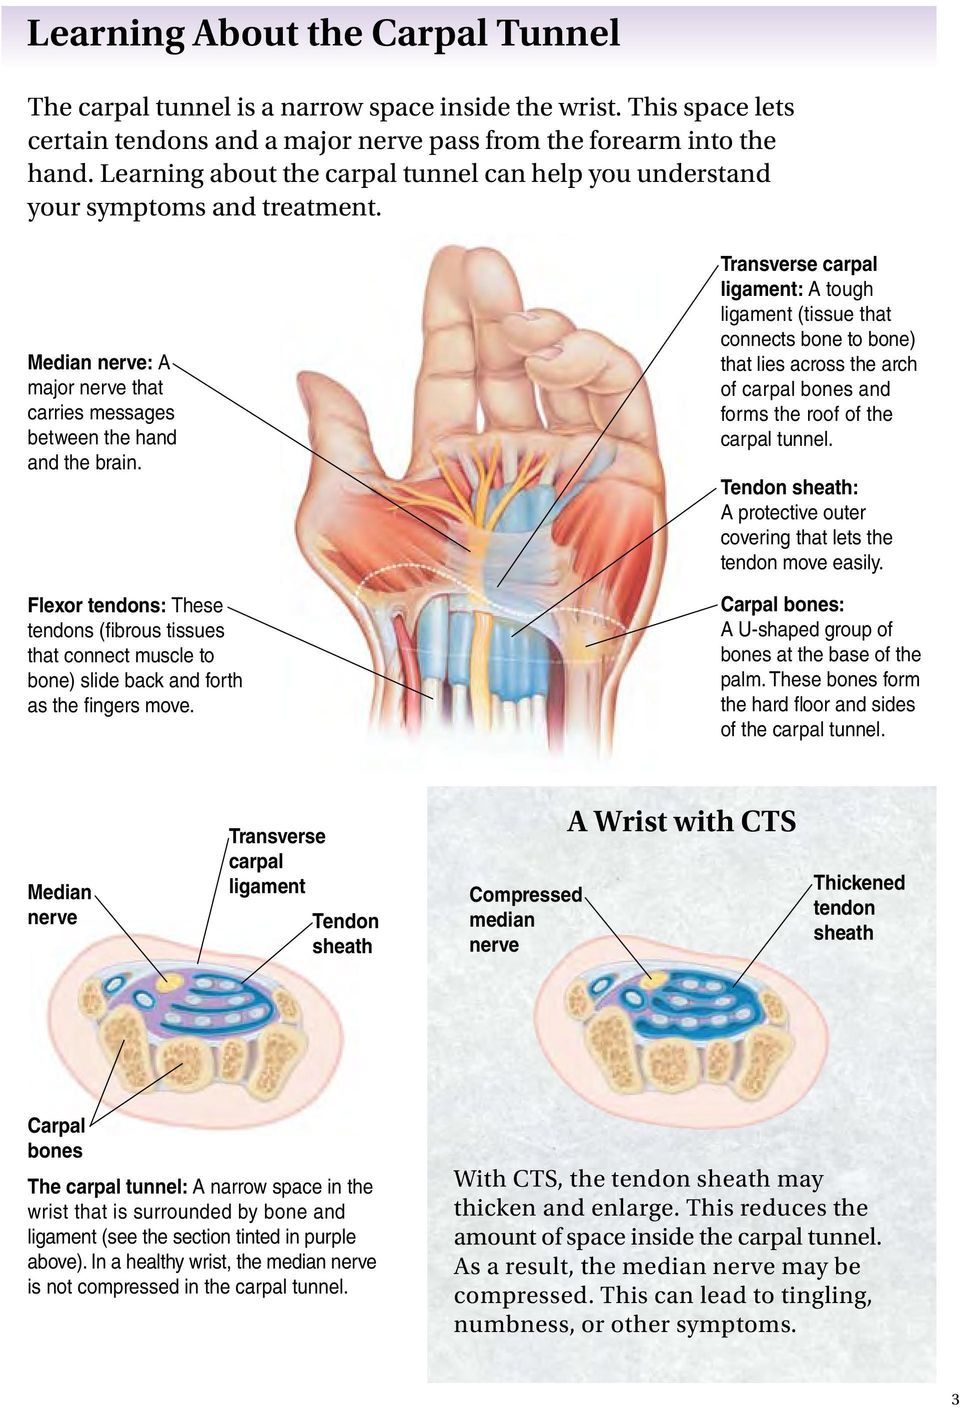 Flexor tendons: These tendons (fibrous tissues that connect muscle to bone) slide back and forth as the fingers move.